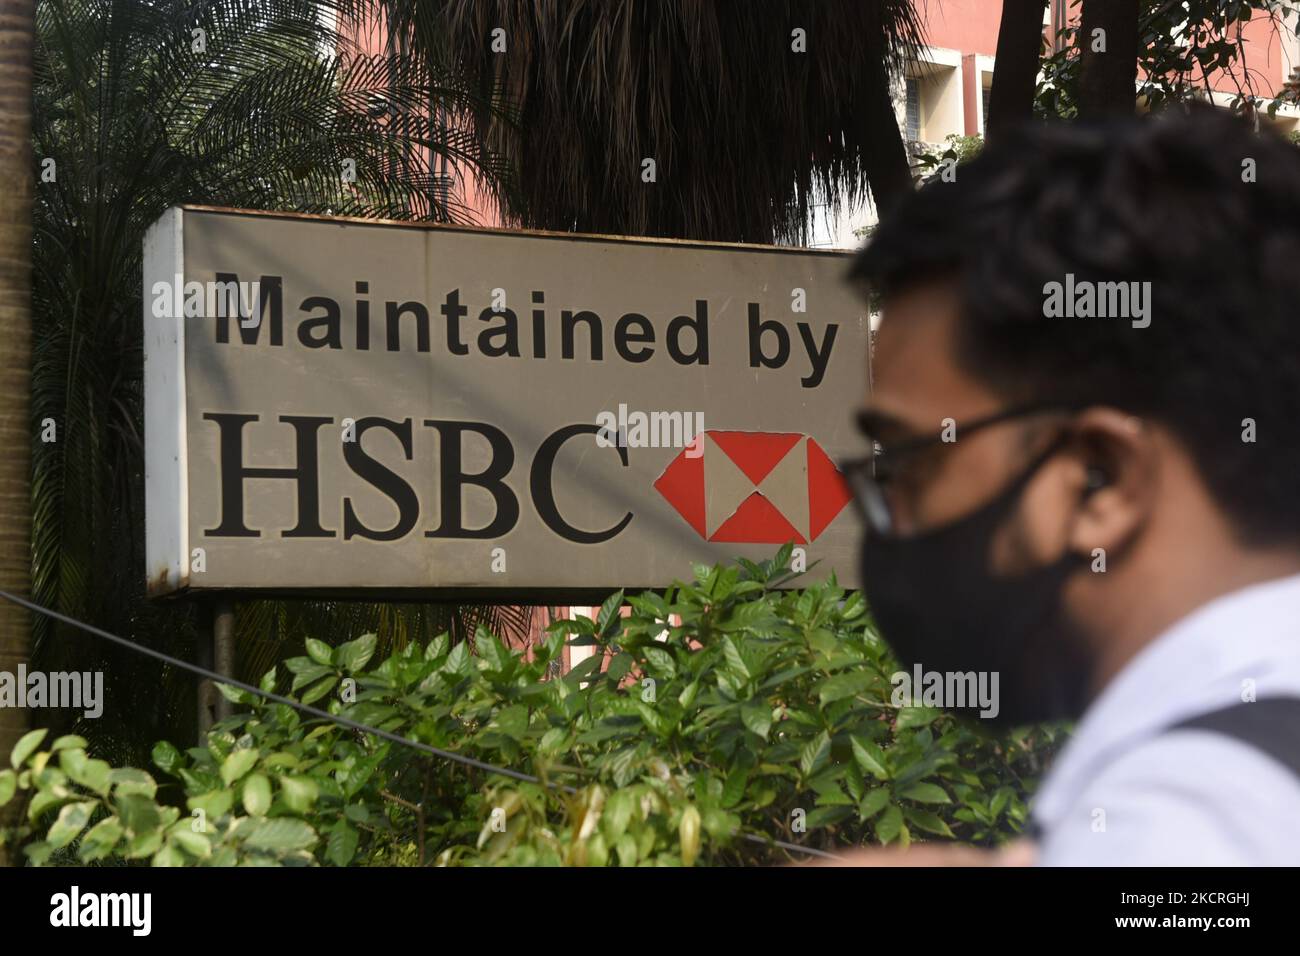 A man crosses HSBC logo in Kolkata, India, 25 October, 2021. HSBC’s profits rose 74% in the third quarter as improving economic conditions allowed the bank to release hundreds of millions of pounds originally set aside for a potential jump in loan defaults during the pandemic according to an Indian media report. (Photo by Indranil Aditya/NurPhoto) Stock Photo